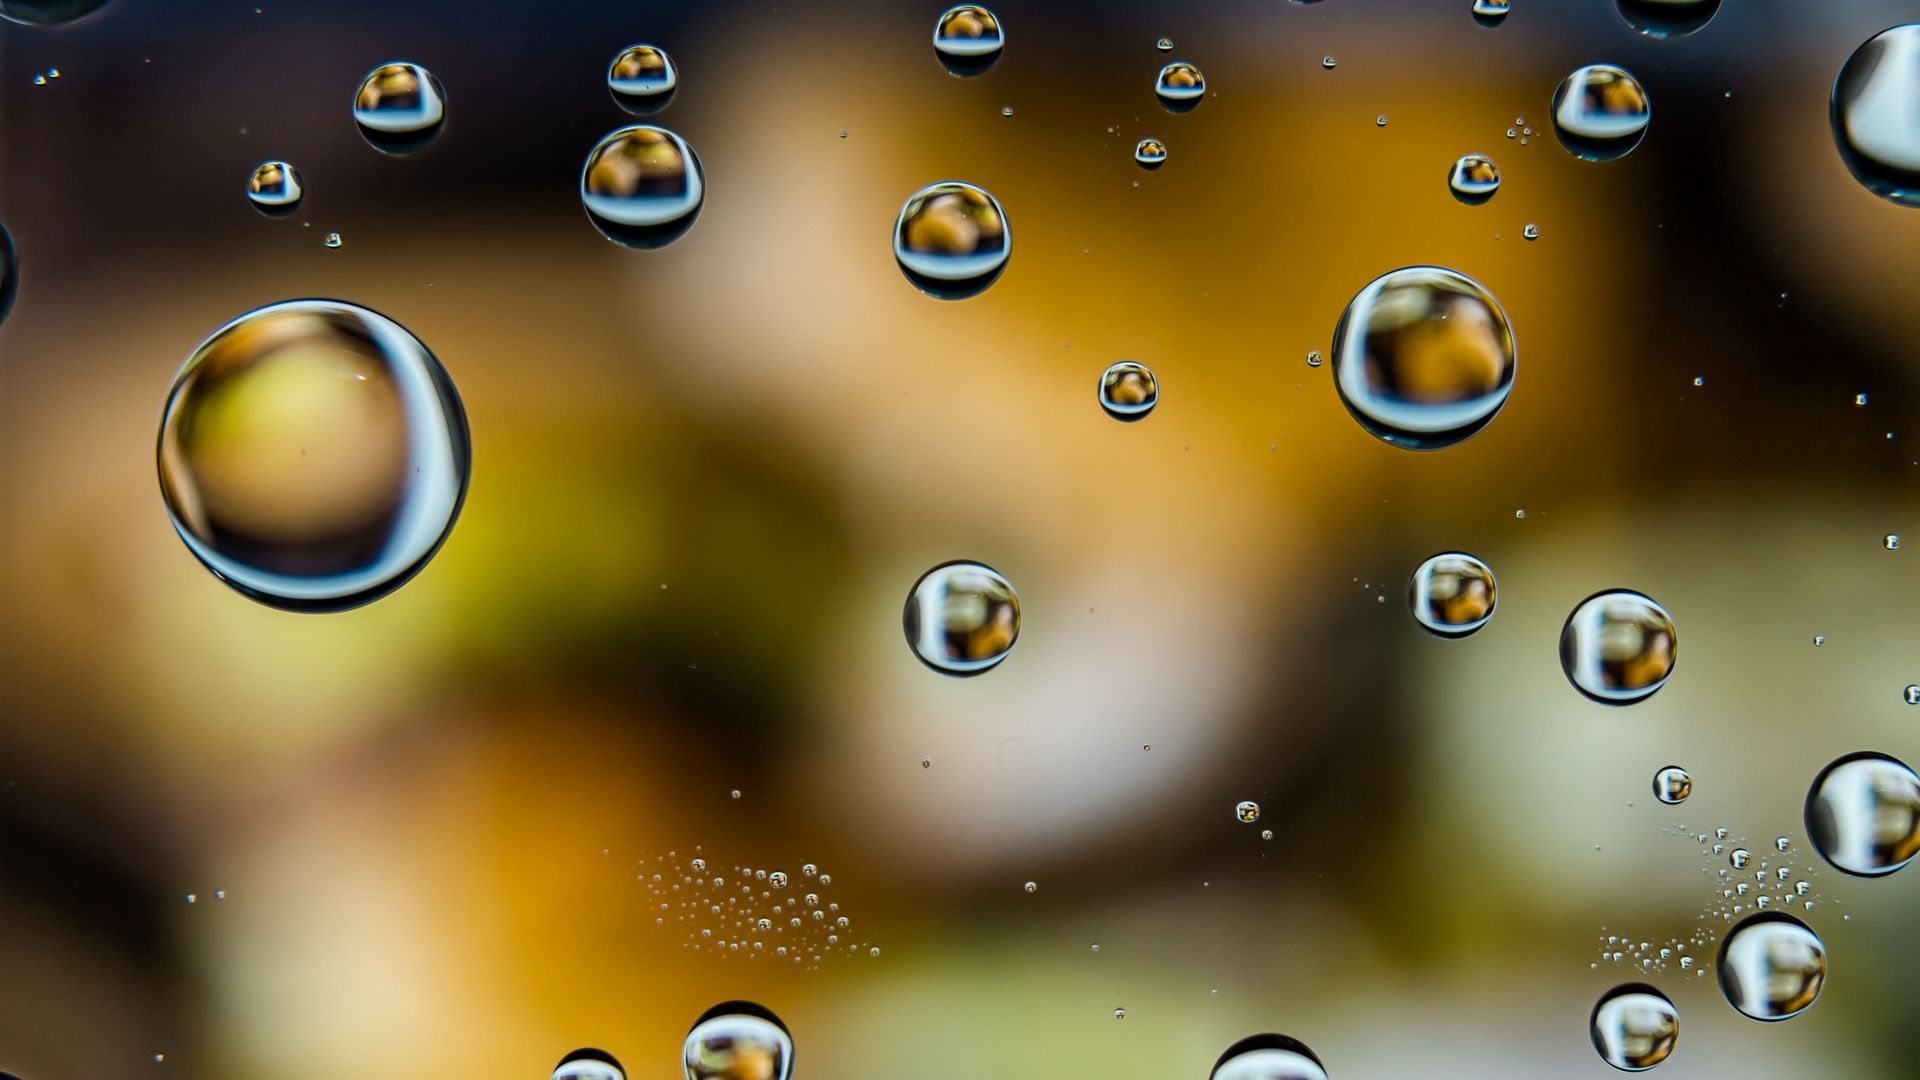 Water droplets captured, High-definition dew, Nature's magnification, HD liquid spheres, collection, 1920x1080 Full HD Desktop